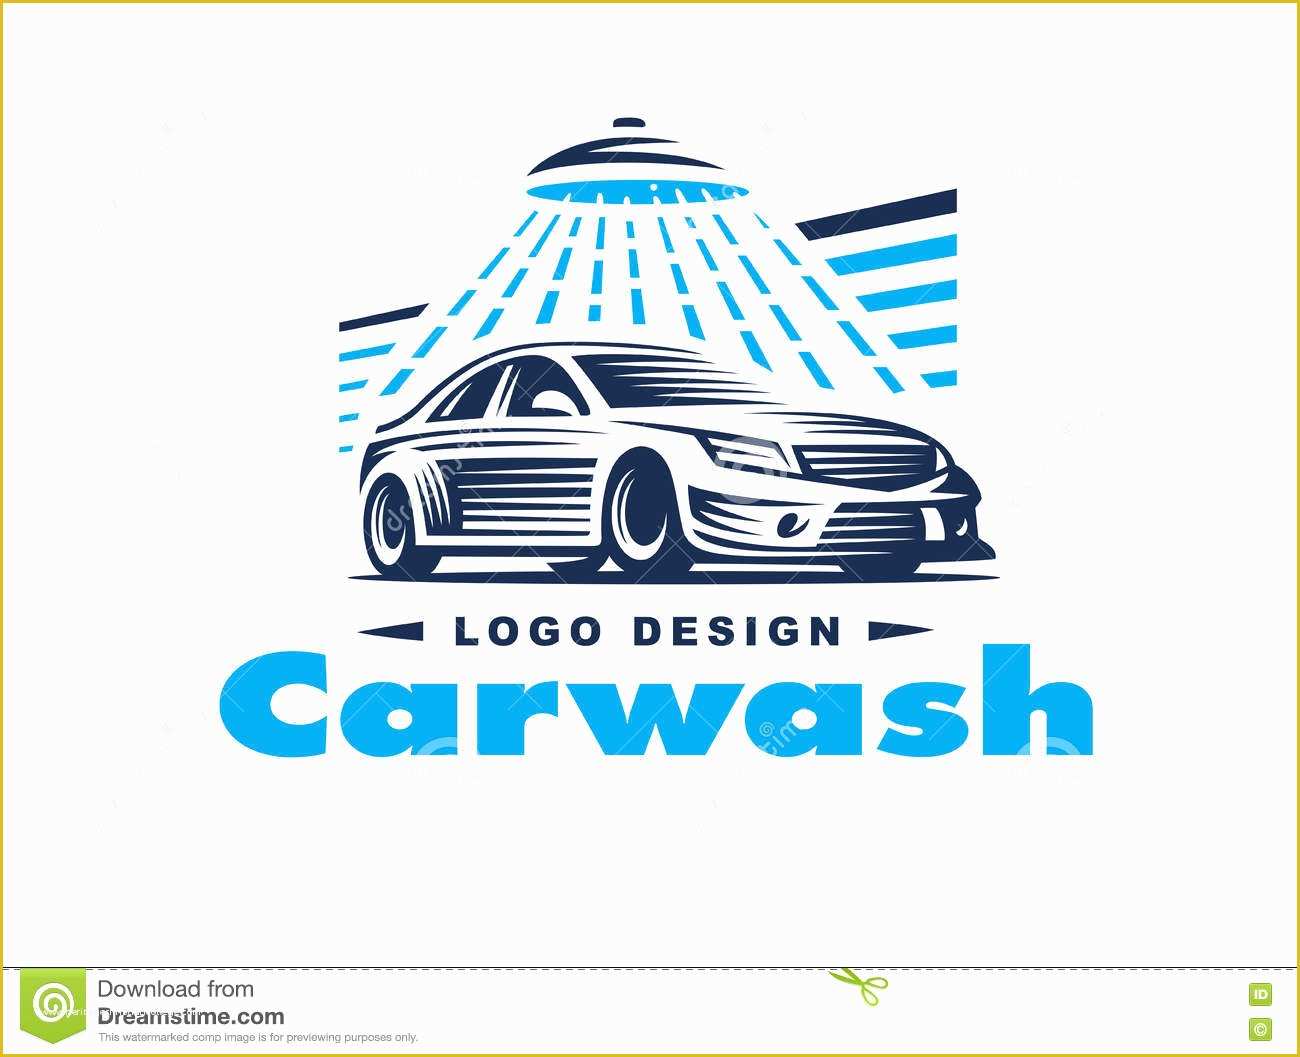 Car Wash Logo Template Free Of Car Wash Logo Design with Shower Icon Vector Illustration